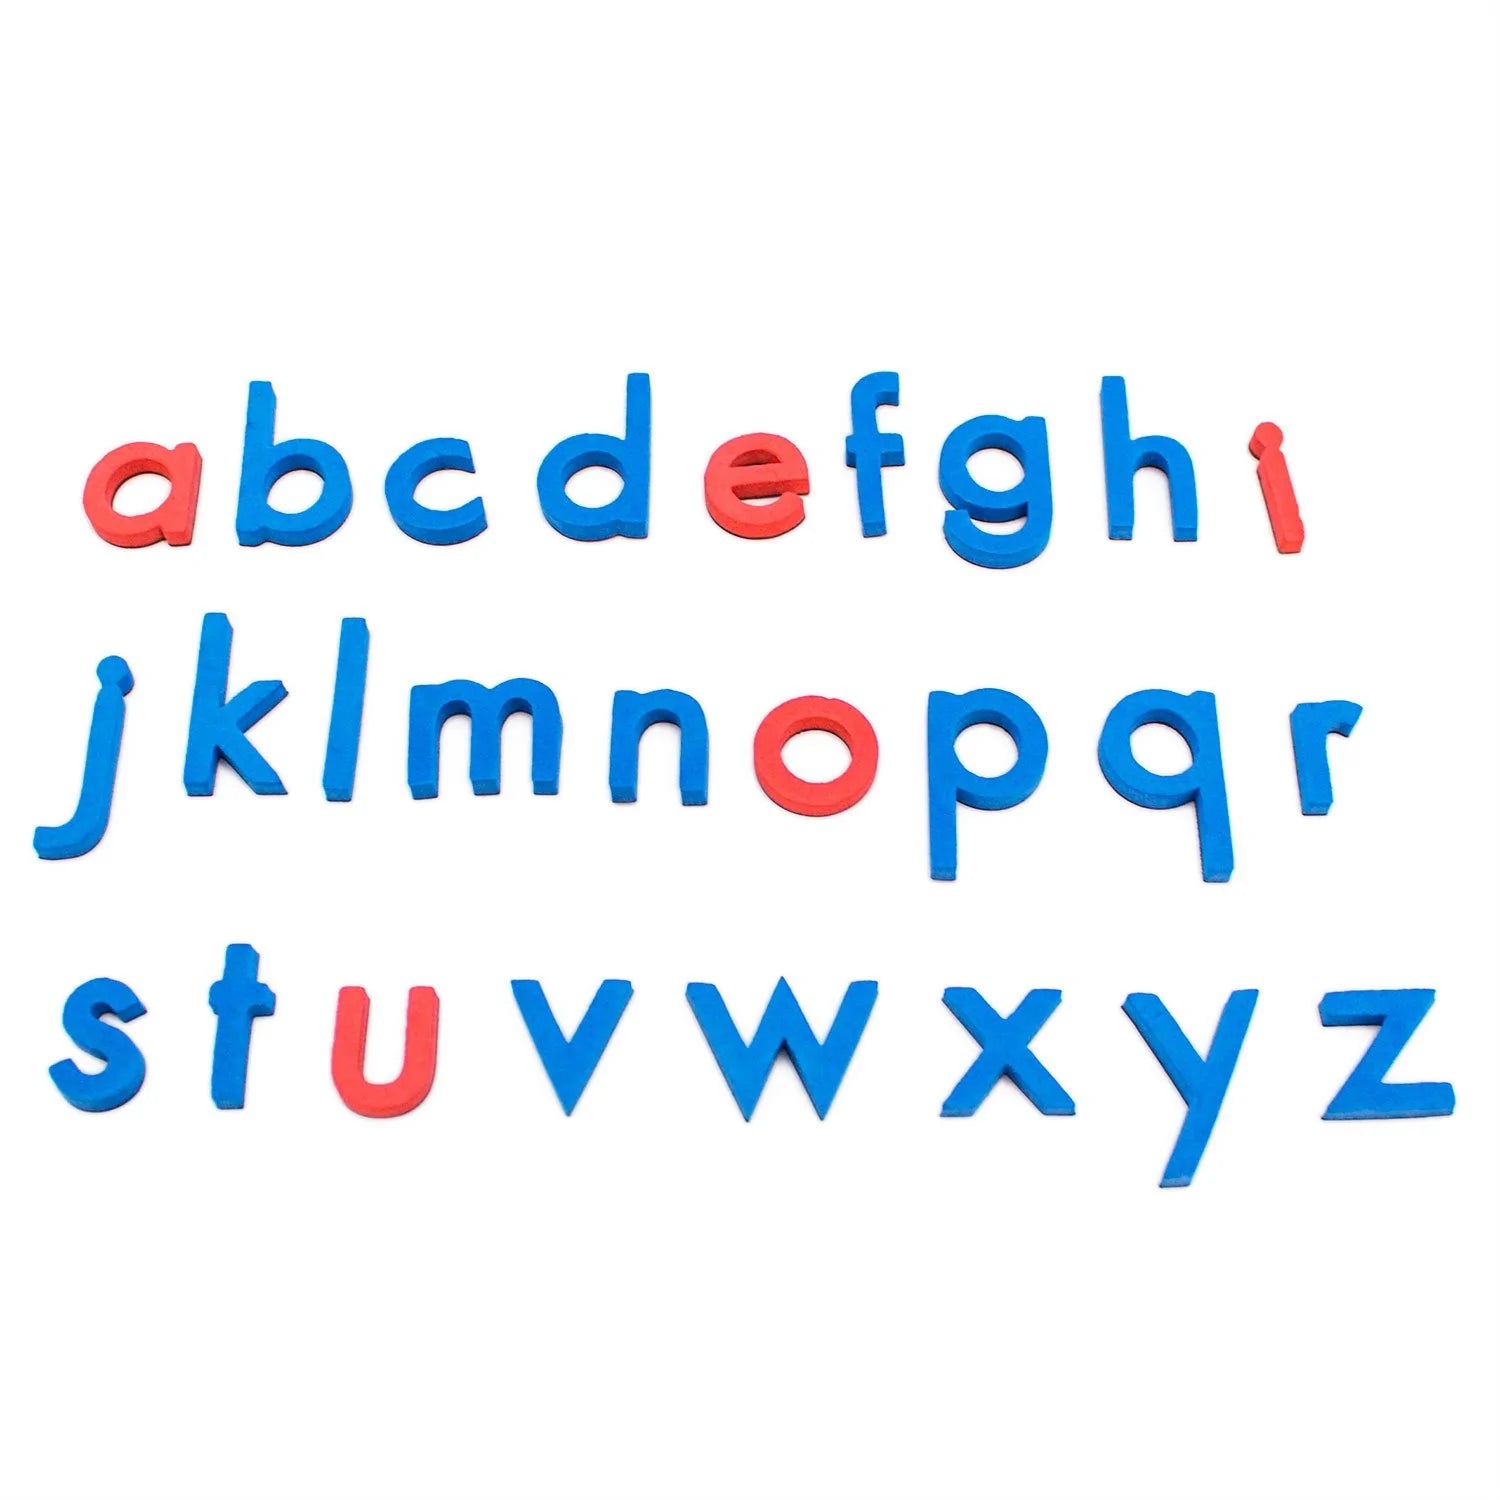 Magnetic Letters - Rainbow Alphabet and Digraphs - Print